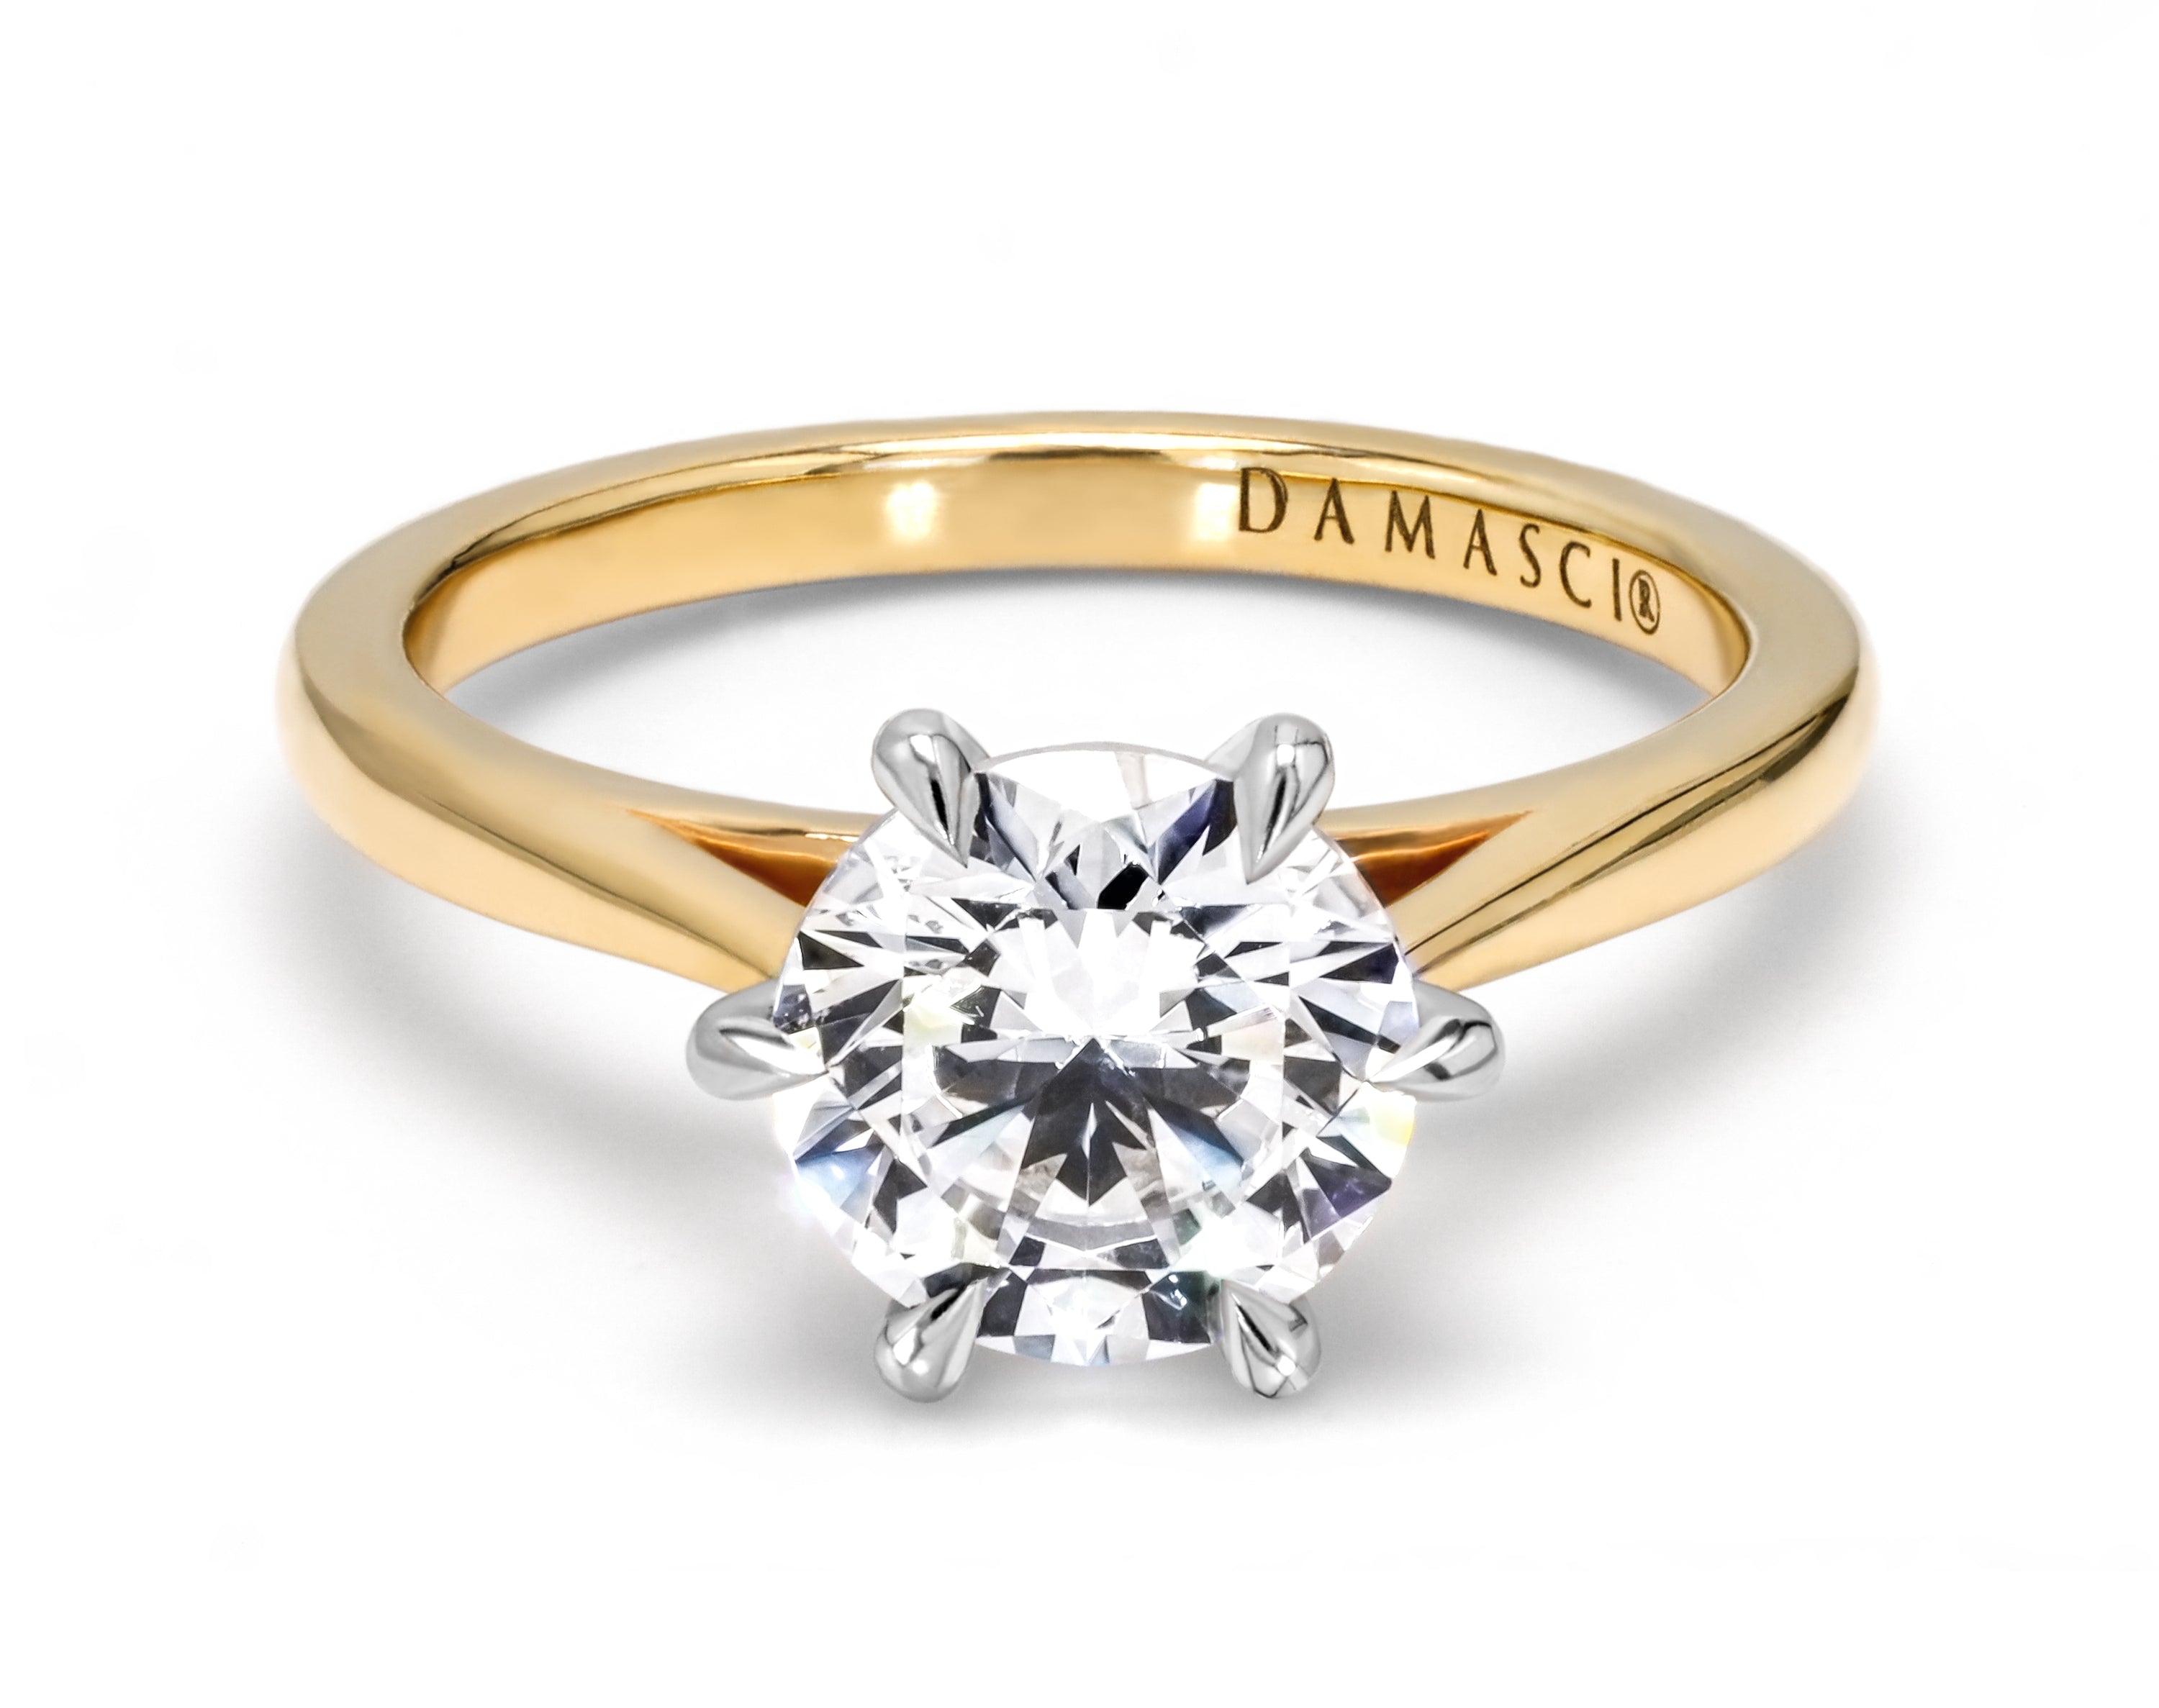 The Language of Love: Engraving Ideas for Your Engagement Ring